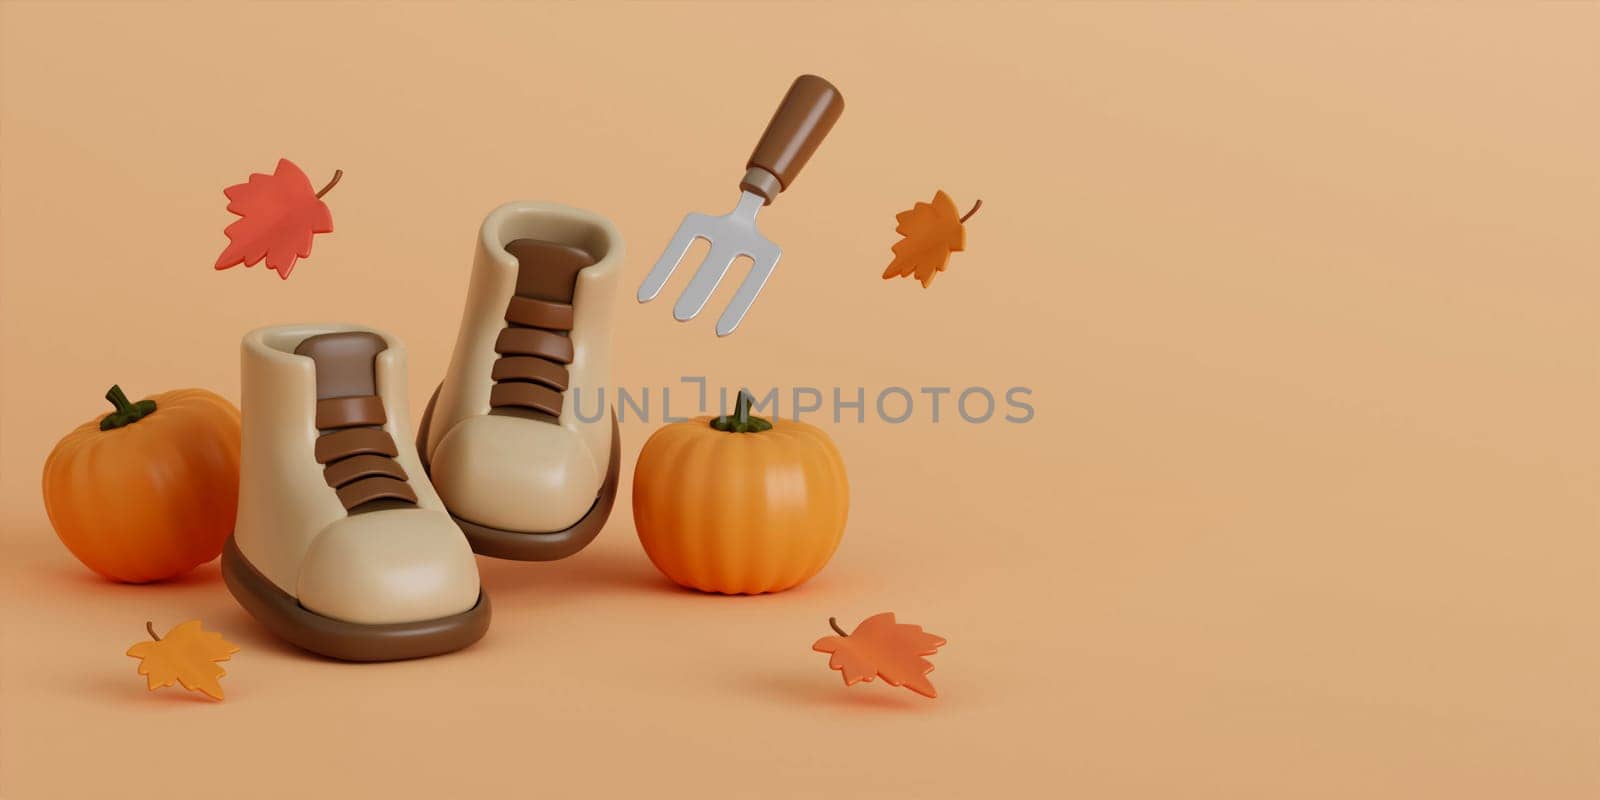 Hello Autumn with boot, leaves, pumpkins, and Shoveling fork background. 3d Fall leaves for the design of Fall banners, posters, advertisements, cards, sales. 3d render illustration. by meepiangraphic